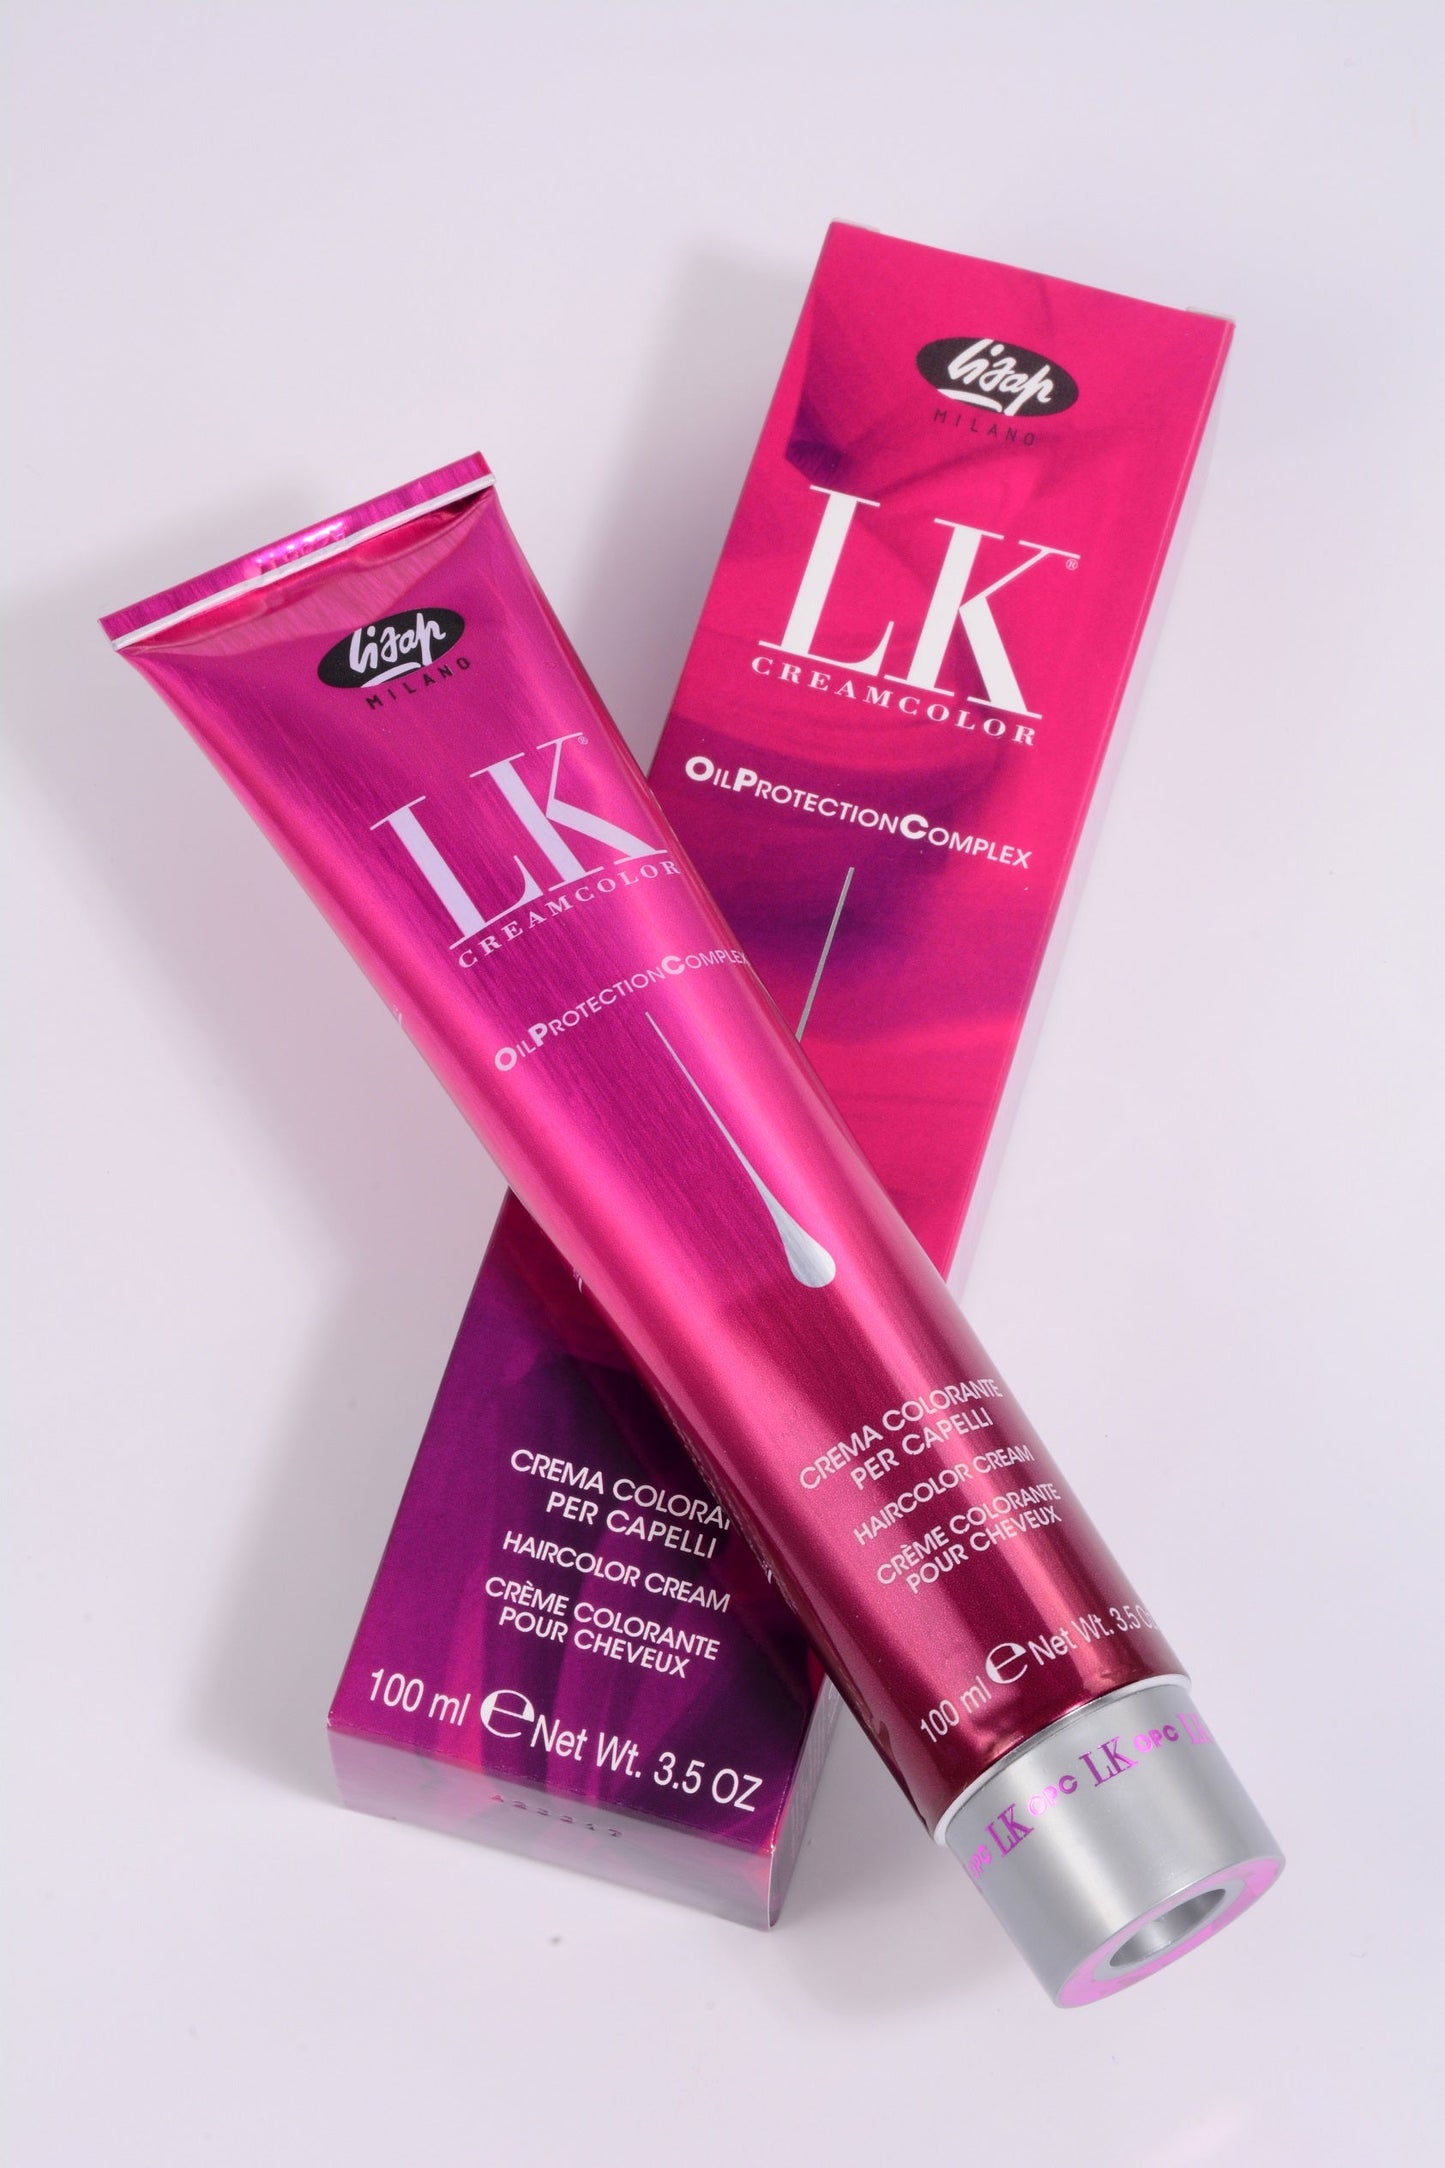 LK Creamcolor 8/82 Oil Protection Complex